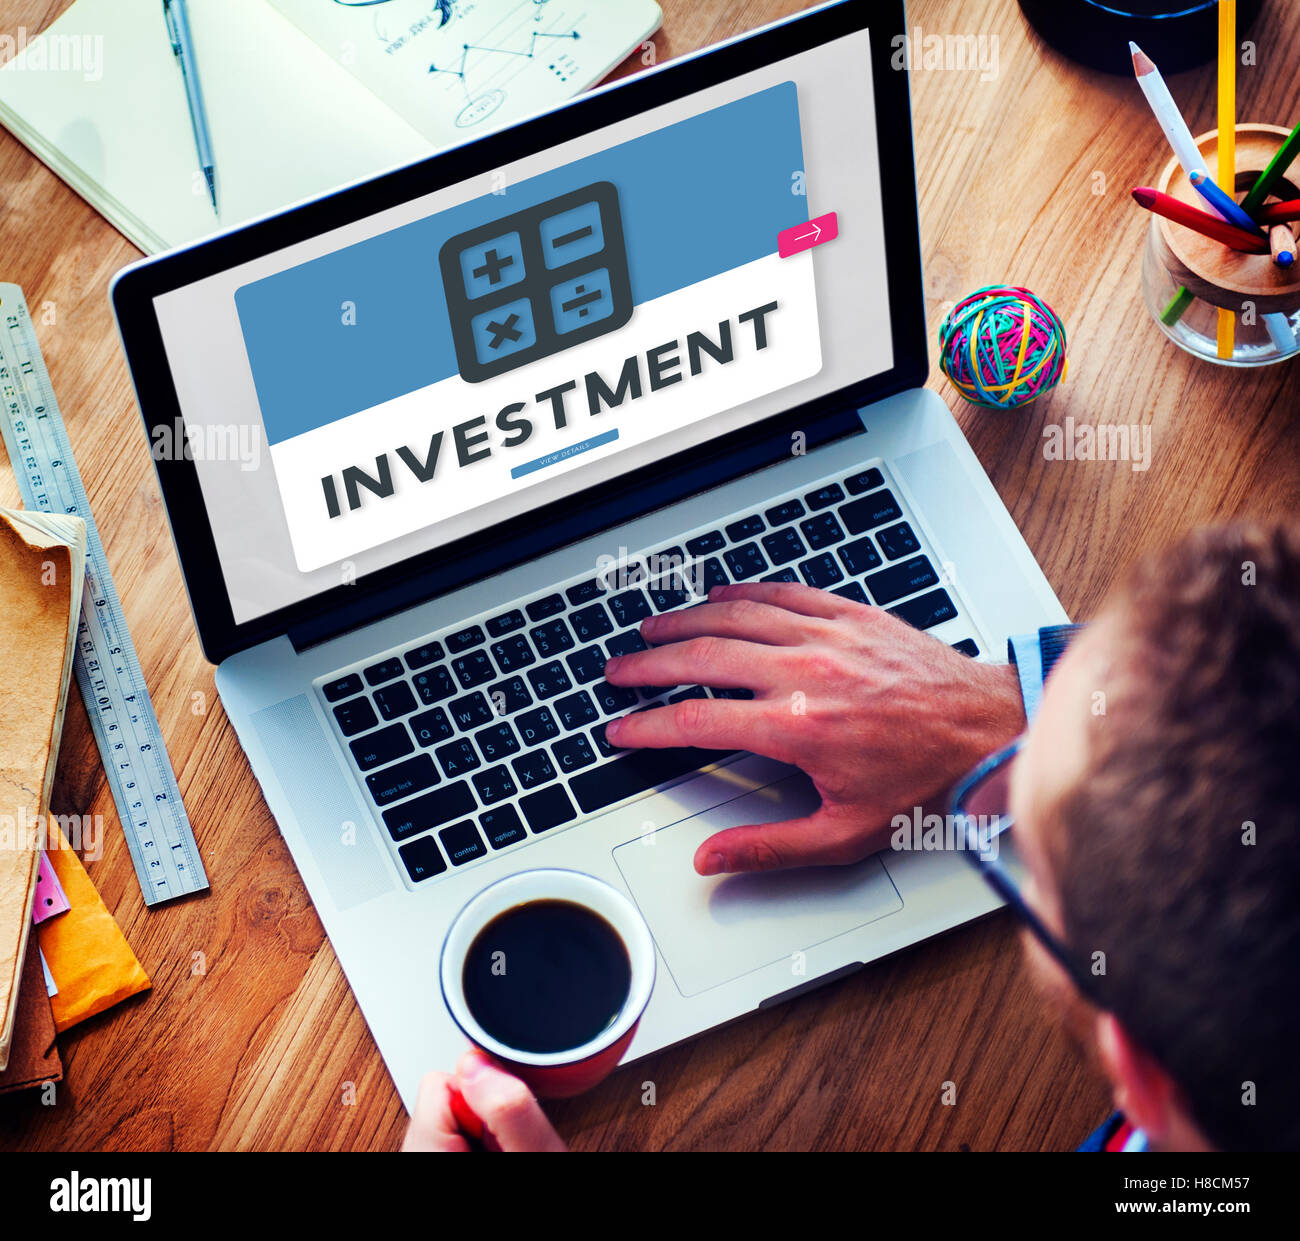 Investment Accounting Finance Budget Concept Stock Photo